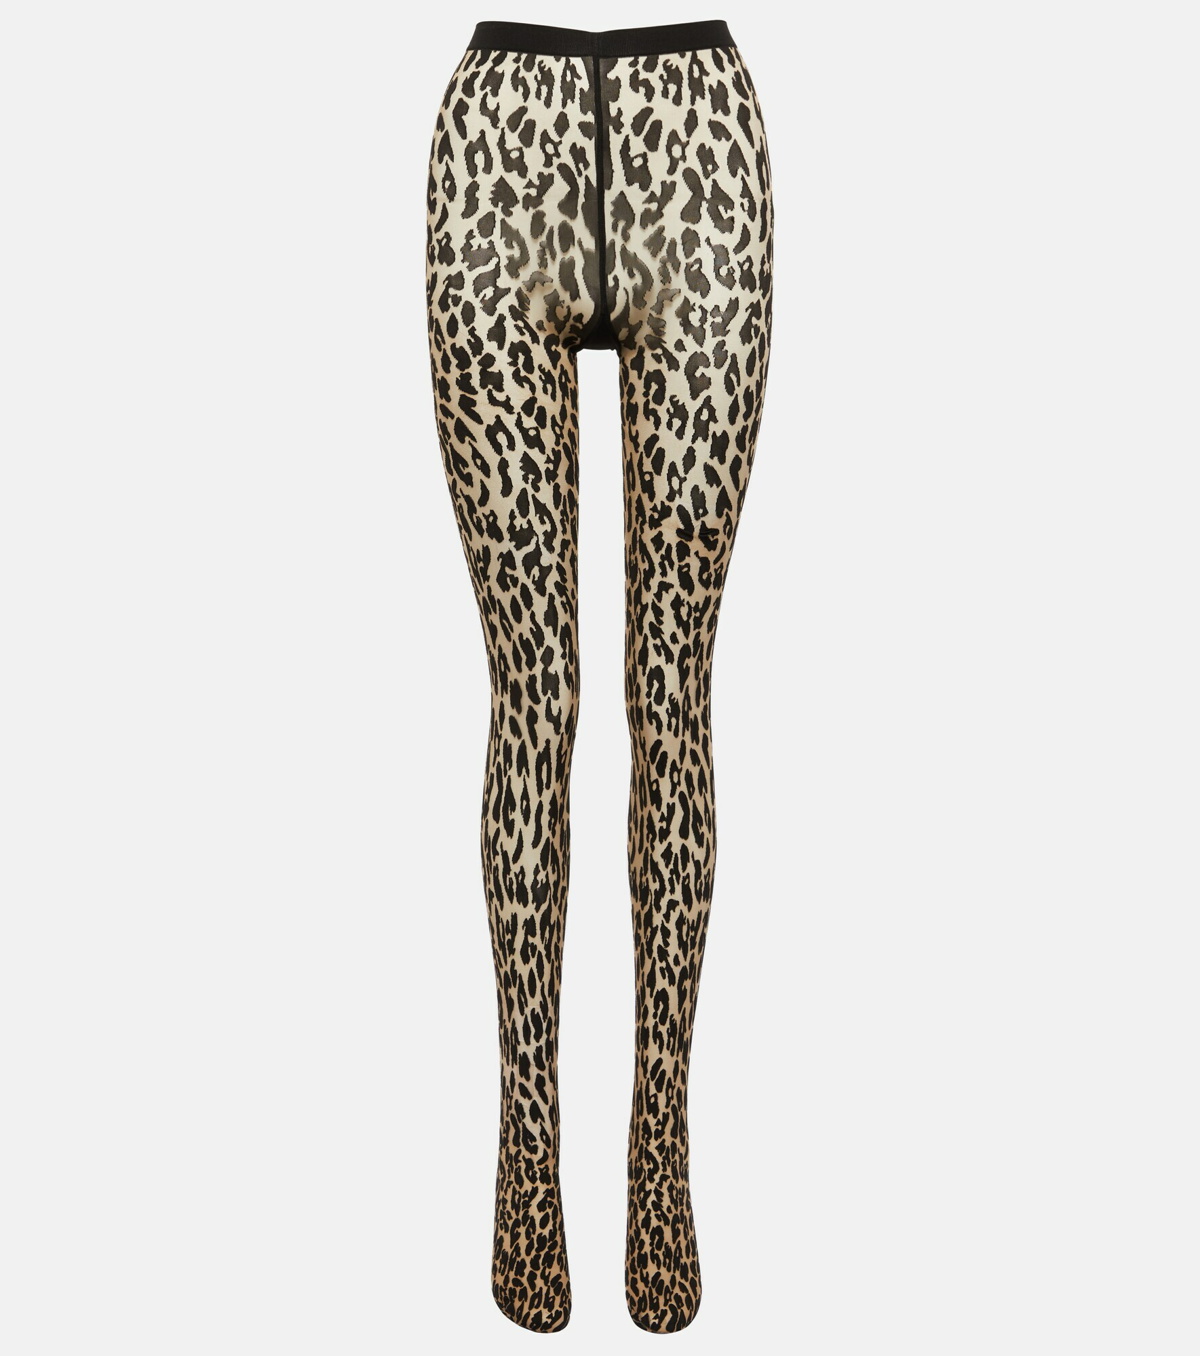 Wolford Josey Leopard Print Tights Wolford 7455